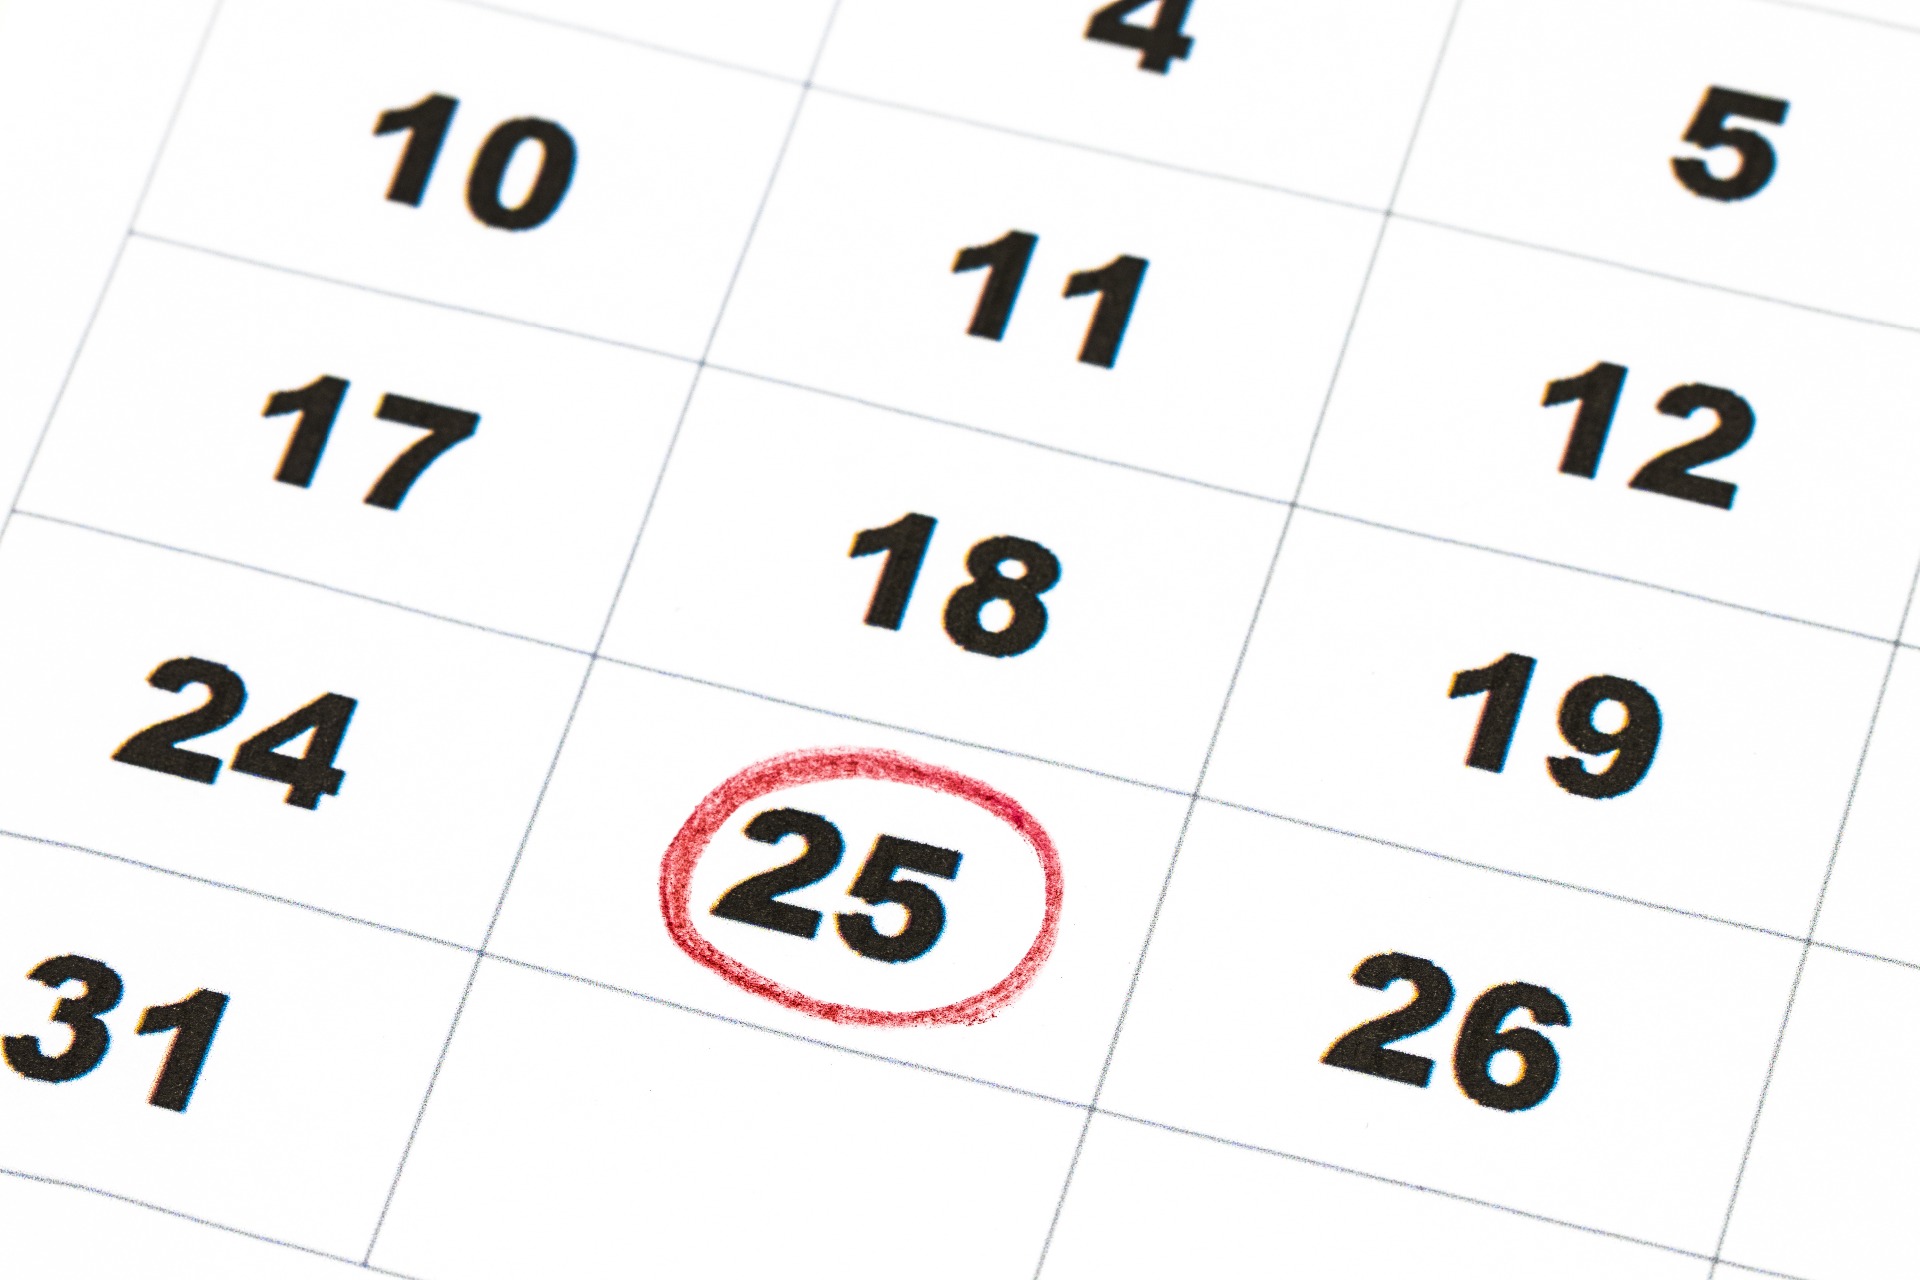 Part of a Calendar with the 25th day of the month circled in red; our Conveyancing Solicitors in Lancaster discuss what happens on the day of completion when you are buying or selling a property.